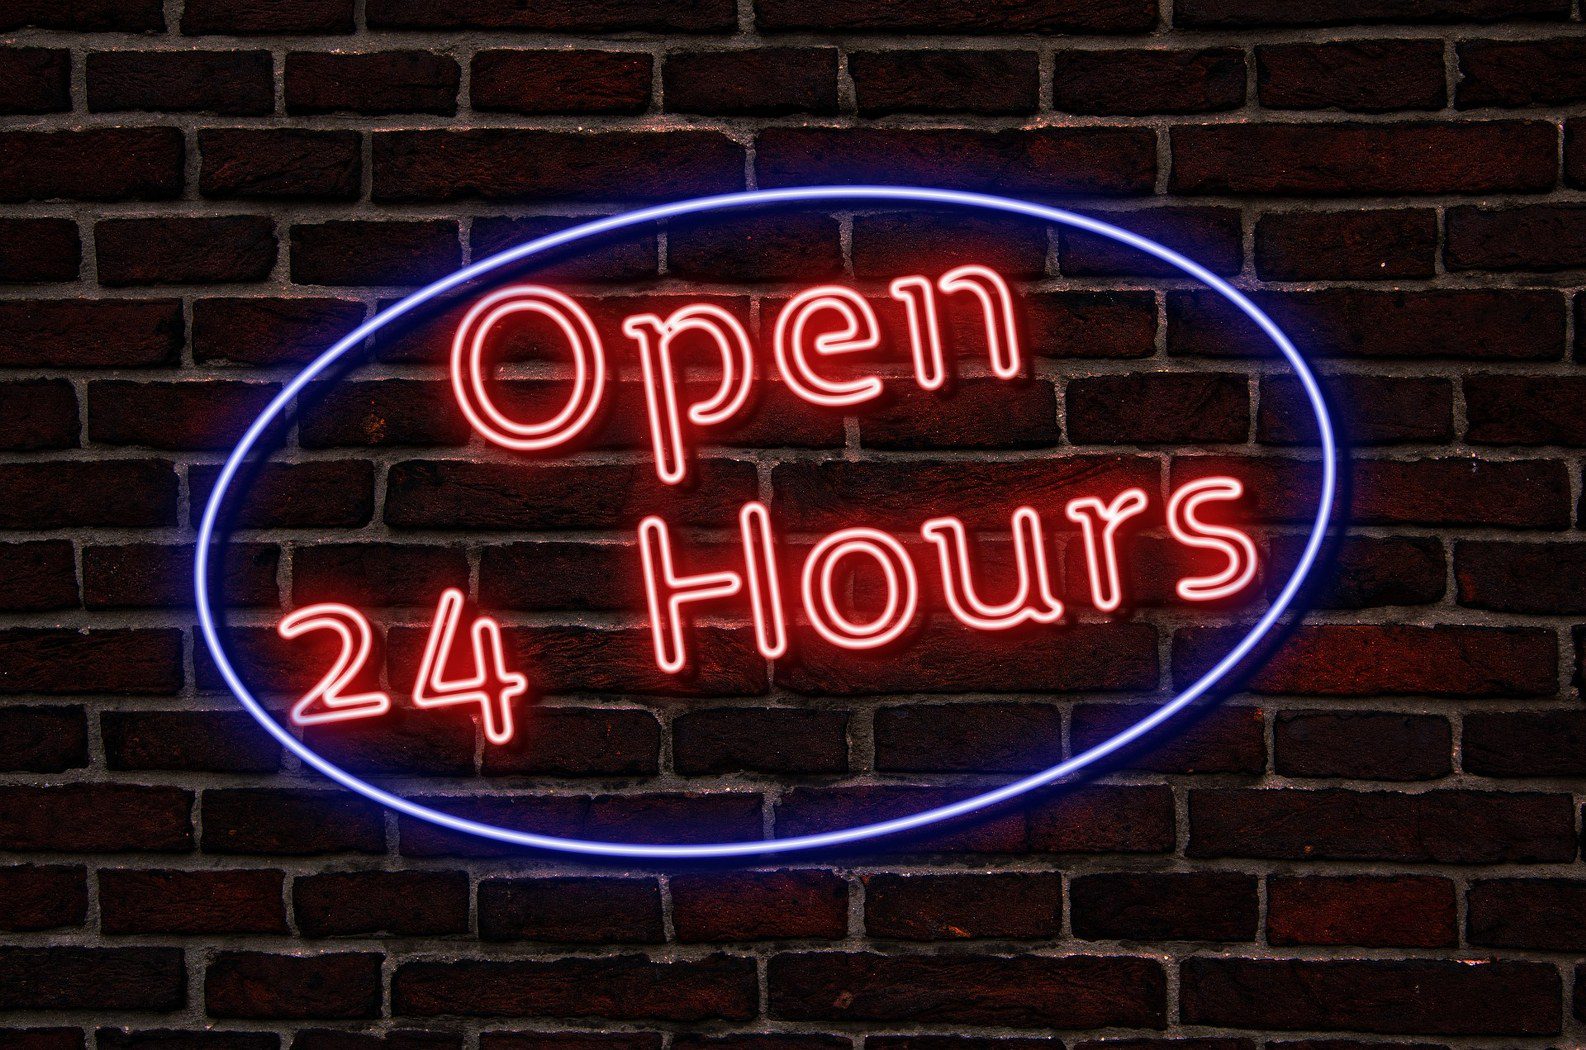 Image of an open 24 hours sign, symbolizing 24/7 answering service